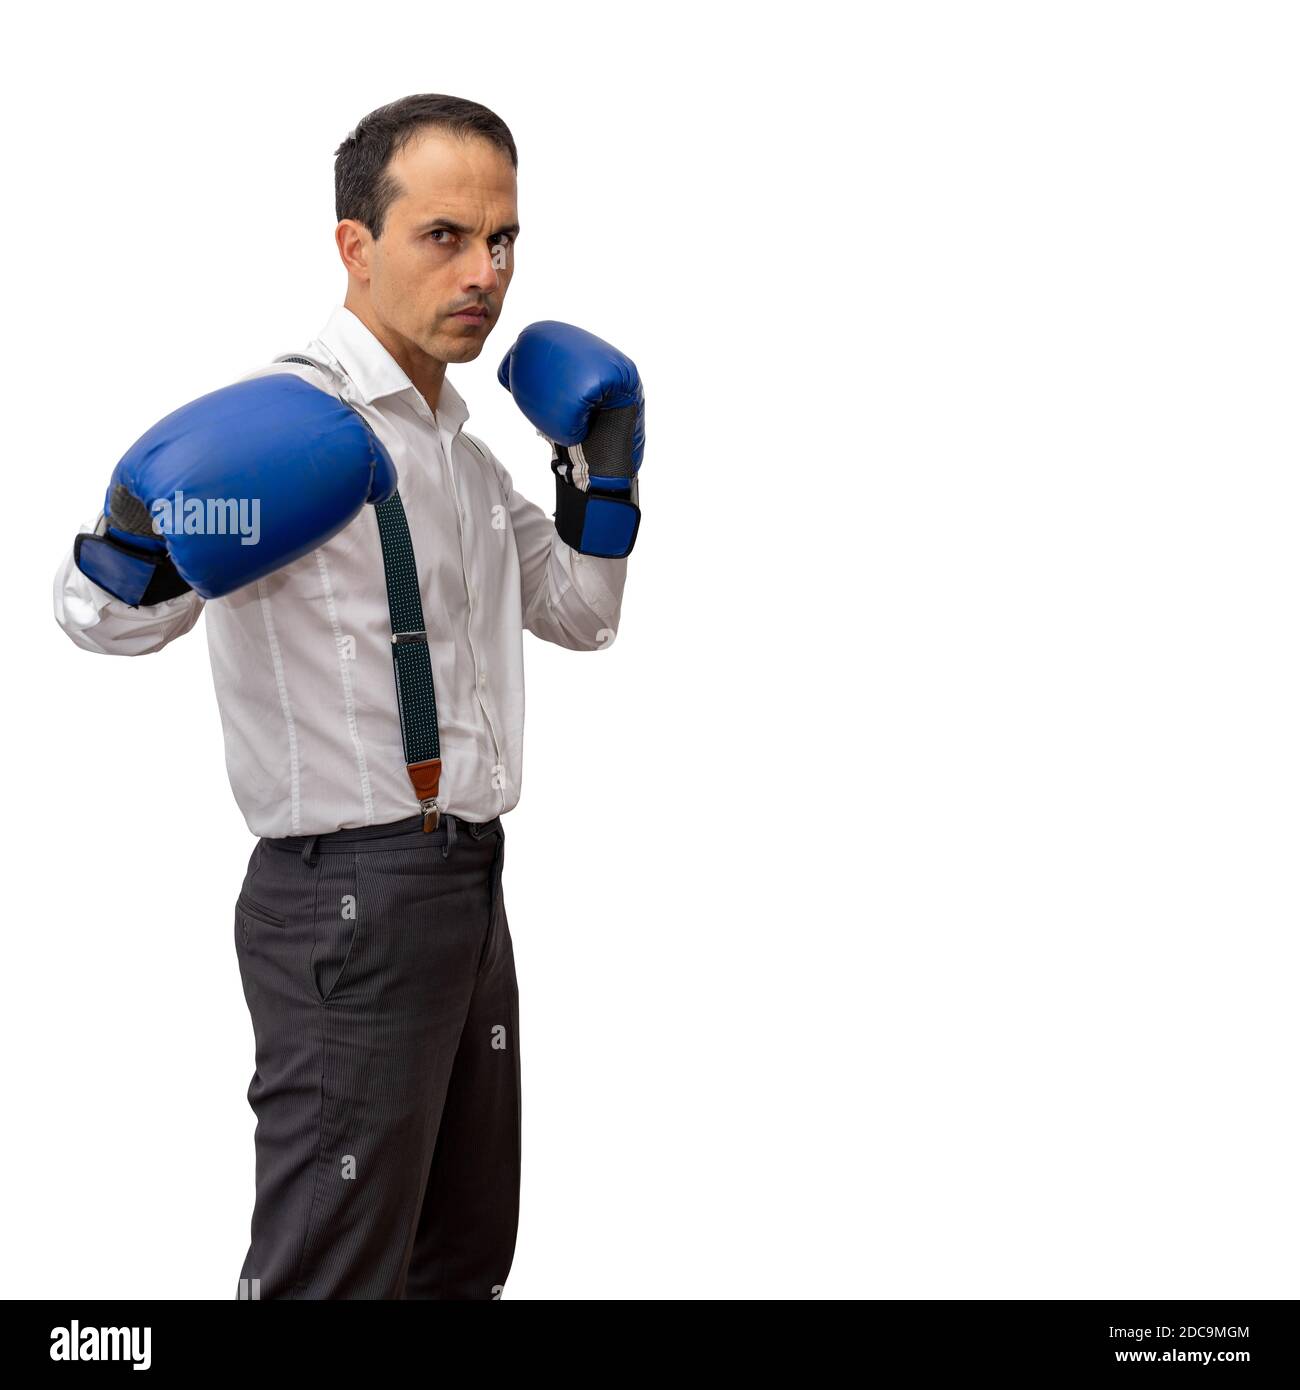 Mature man with long sleeve shirt, suspenders and boxing glove, doing fighting pose. Stock Photo